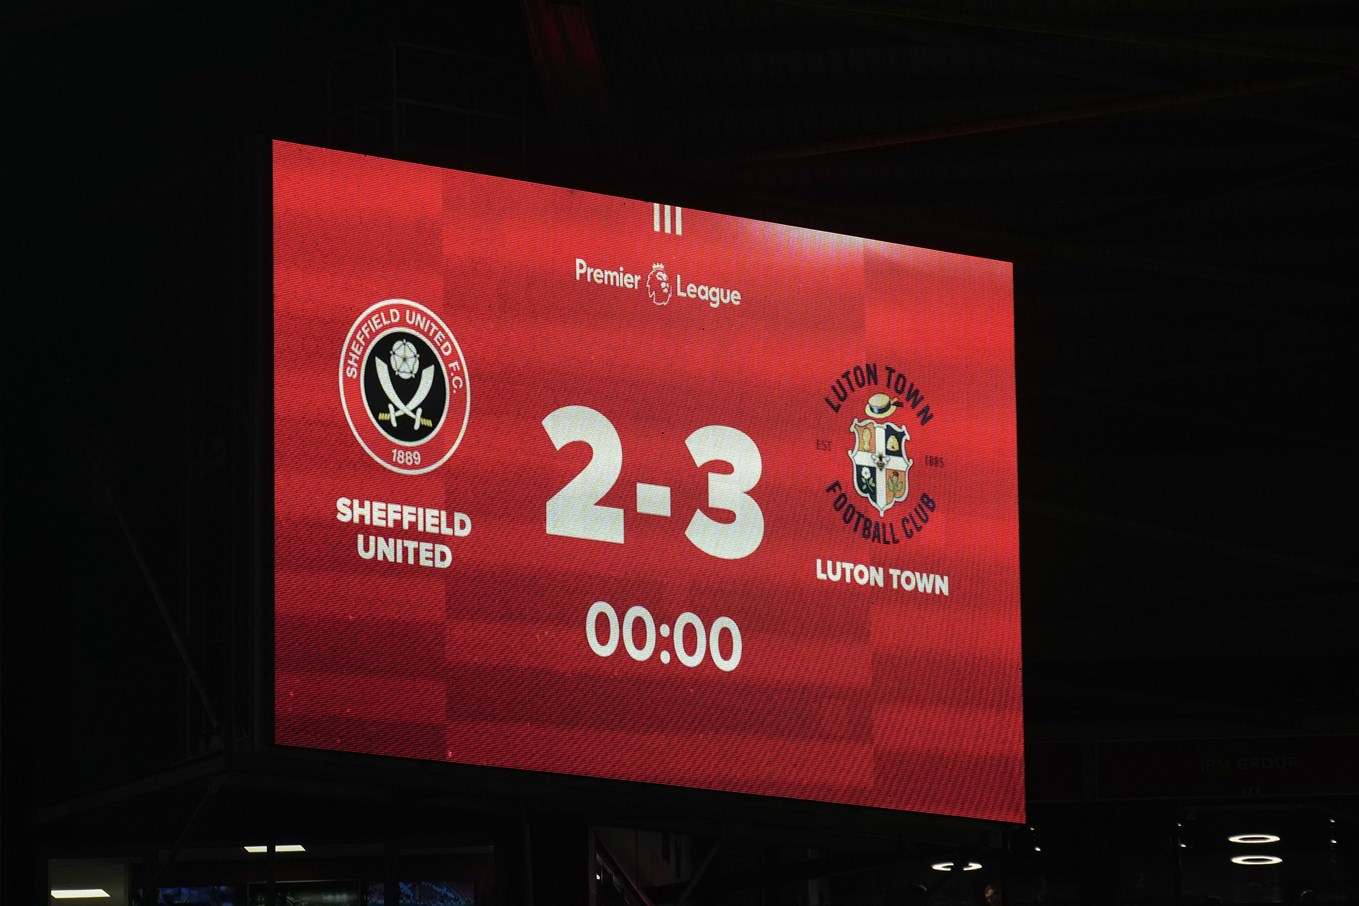 The Bramall Lane scoreboard which reads Sheffield United 2-3 Luton Town at full-time on Boxing Day.